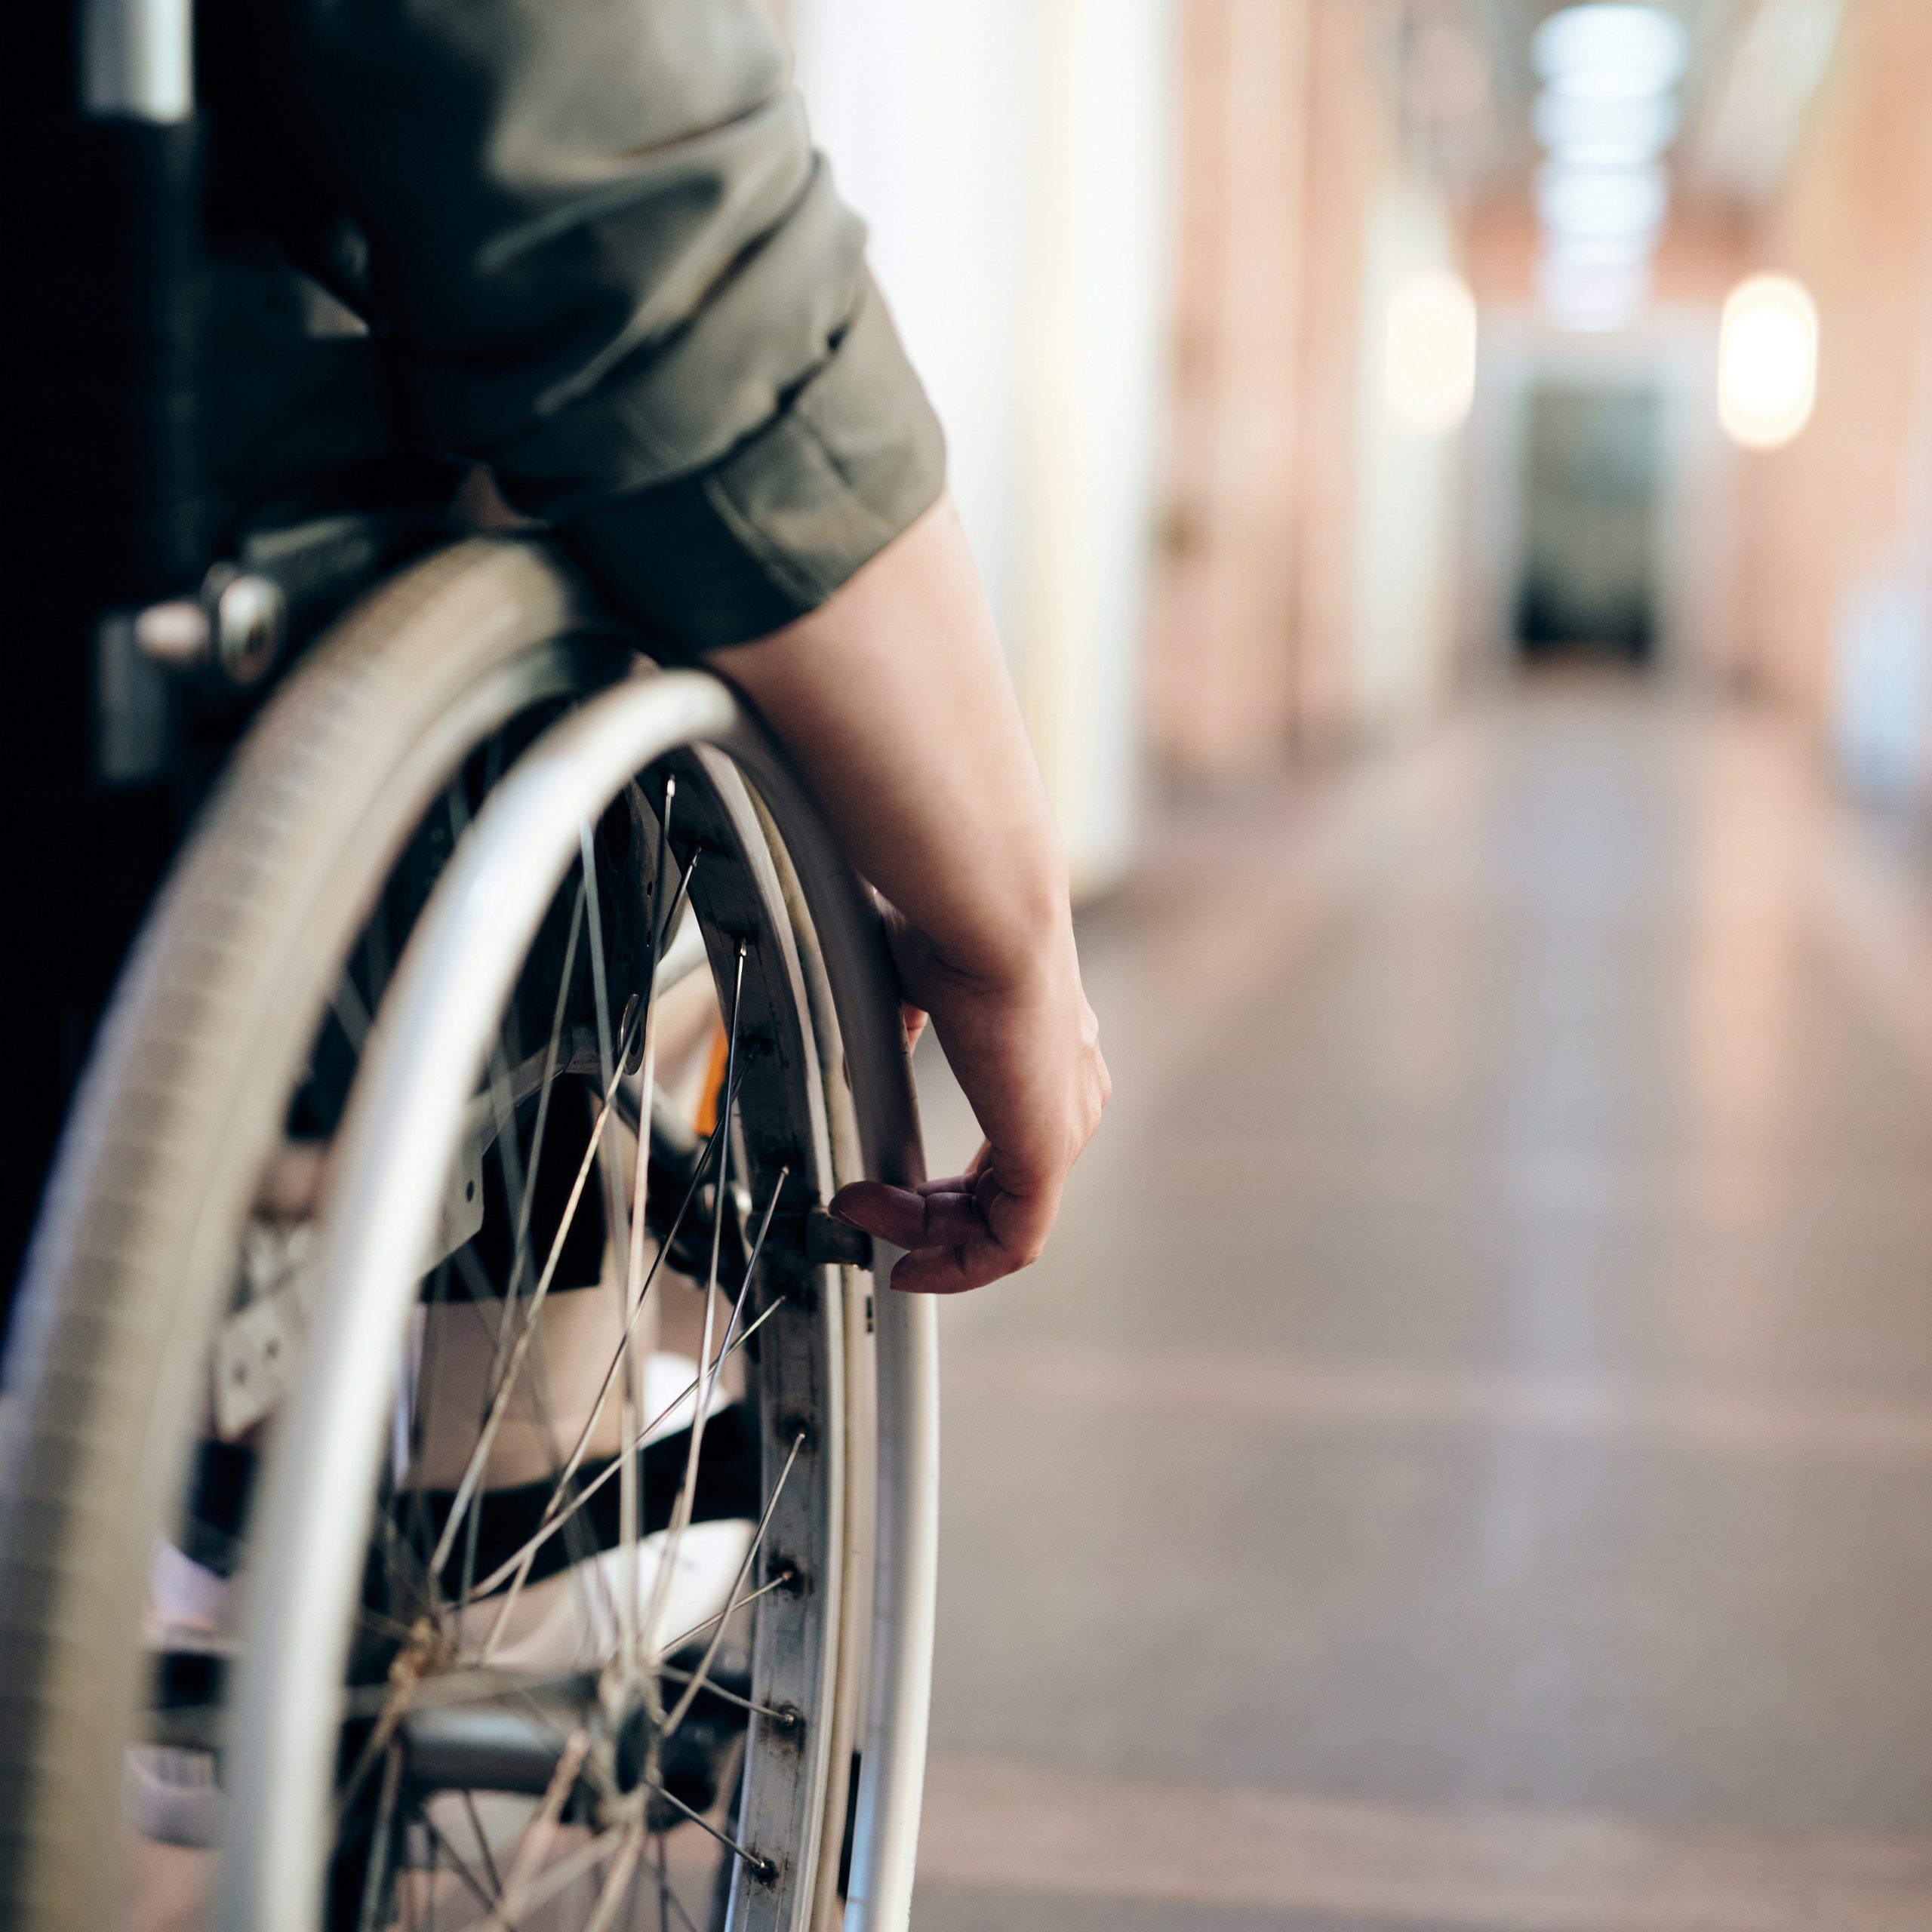 What Can You Expect From Long-Term Disability Benefits After 2 Years?